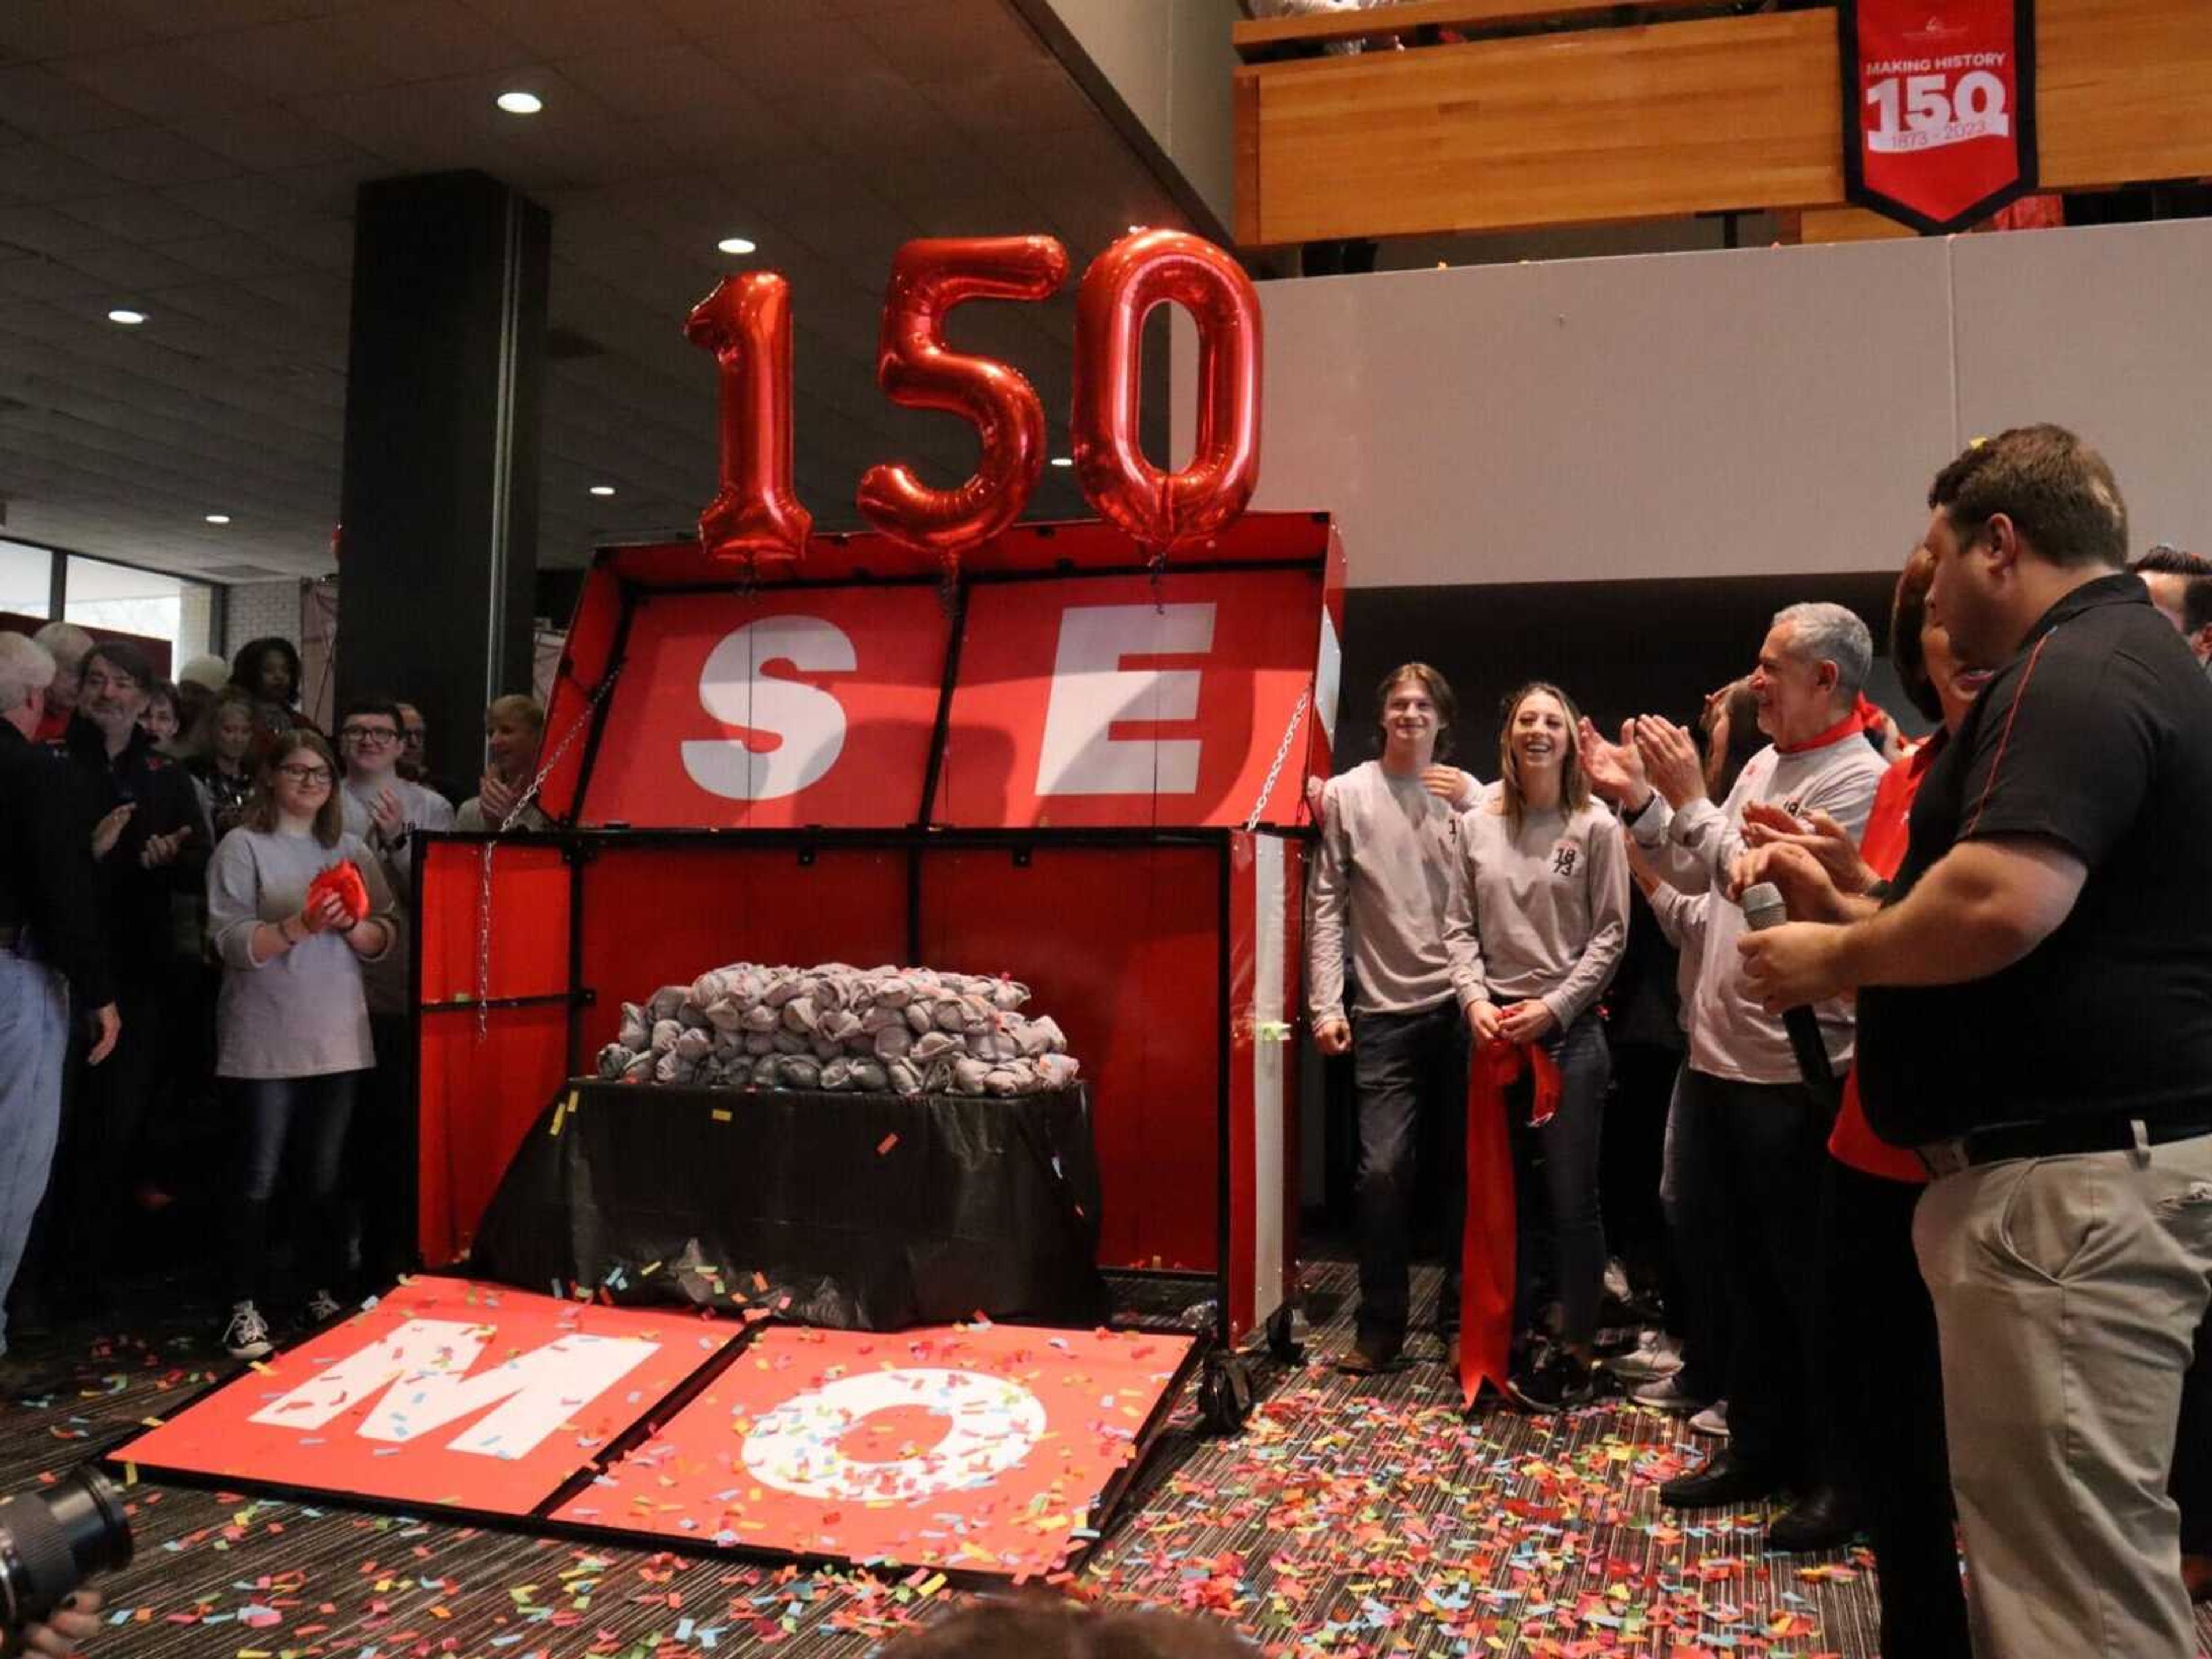 Students and public attendees gather around the 150th SEMO gift that was opened during the SEMO birthday celebration on March 22. Giving day also took place on March 22, and $150,000 was raised.